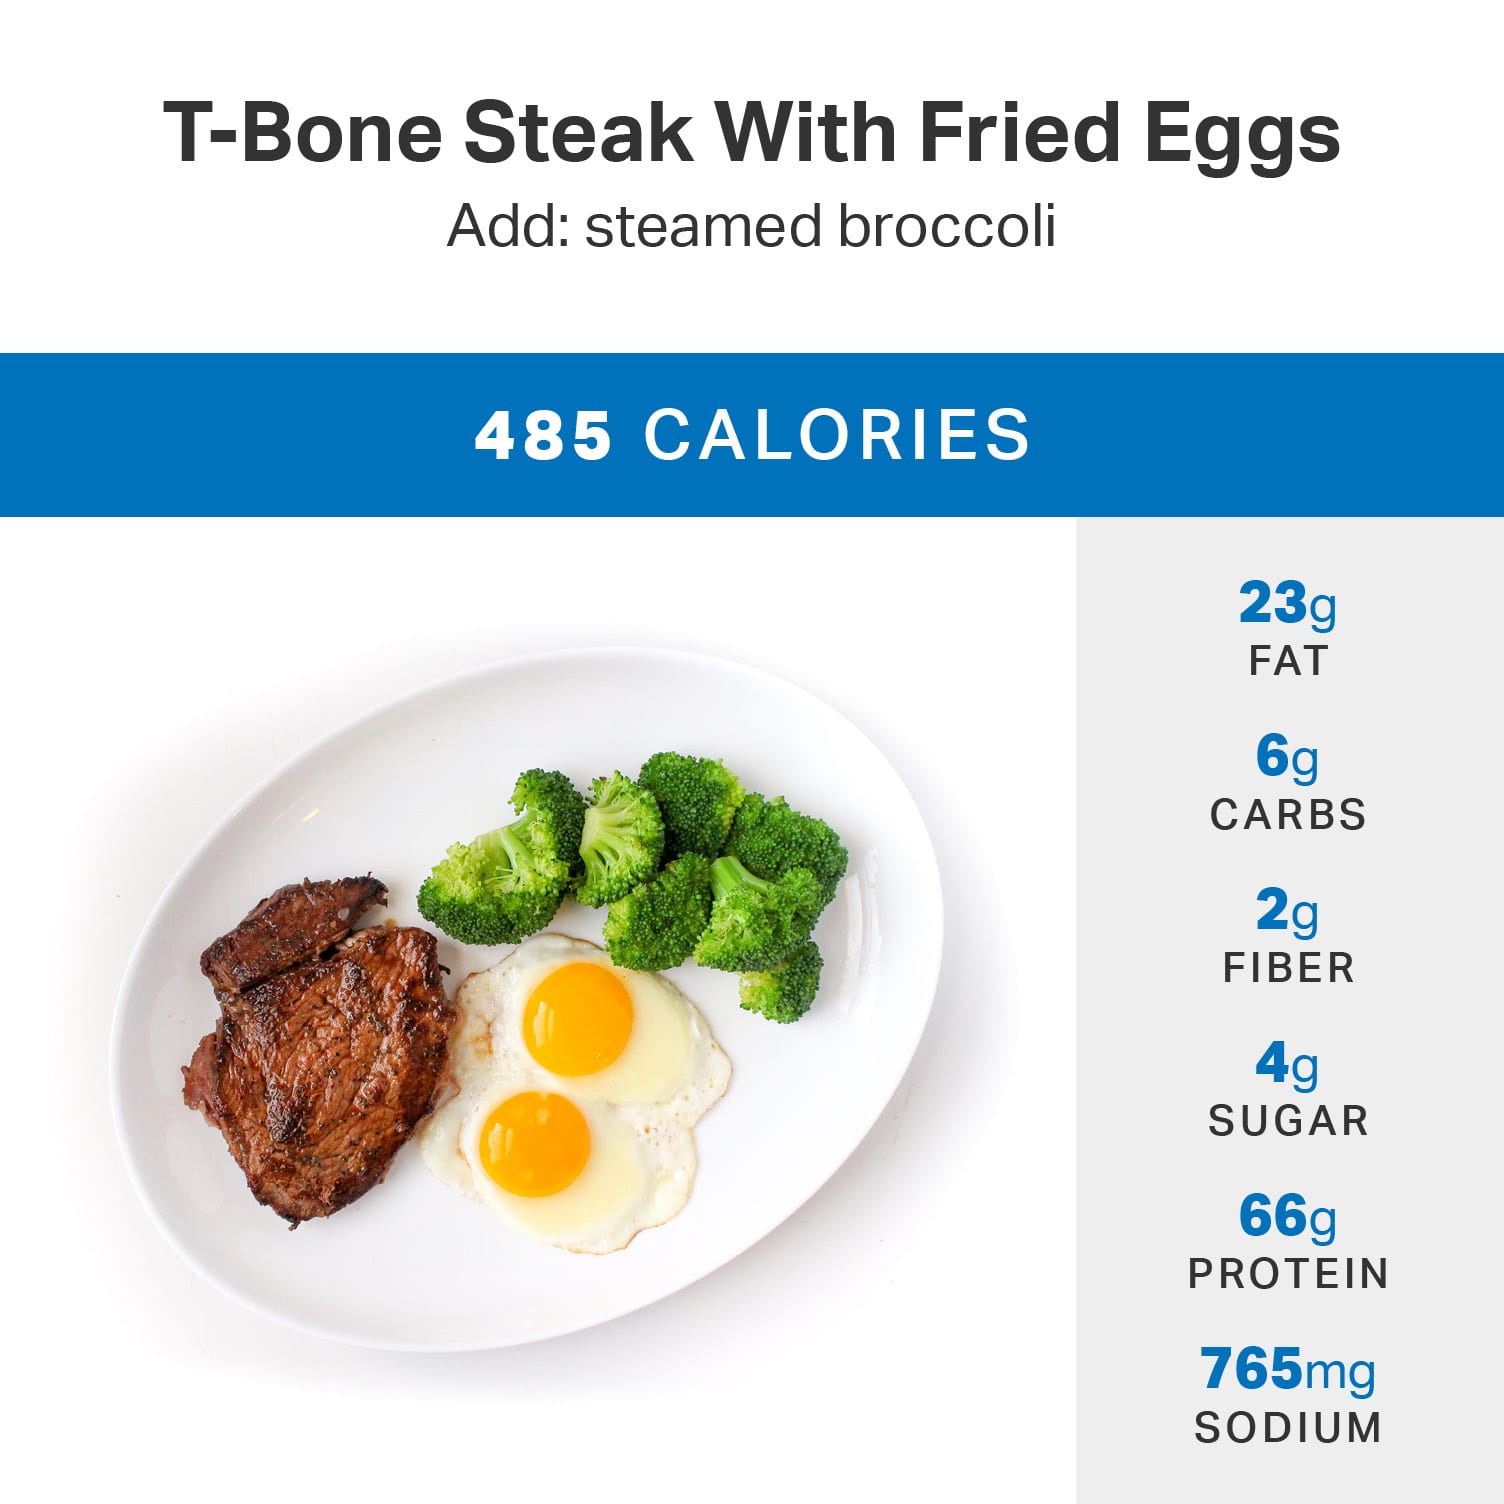 The 7 Healthiest IHOP Menu Items - Nutrition And Calories